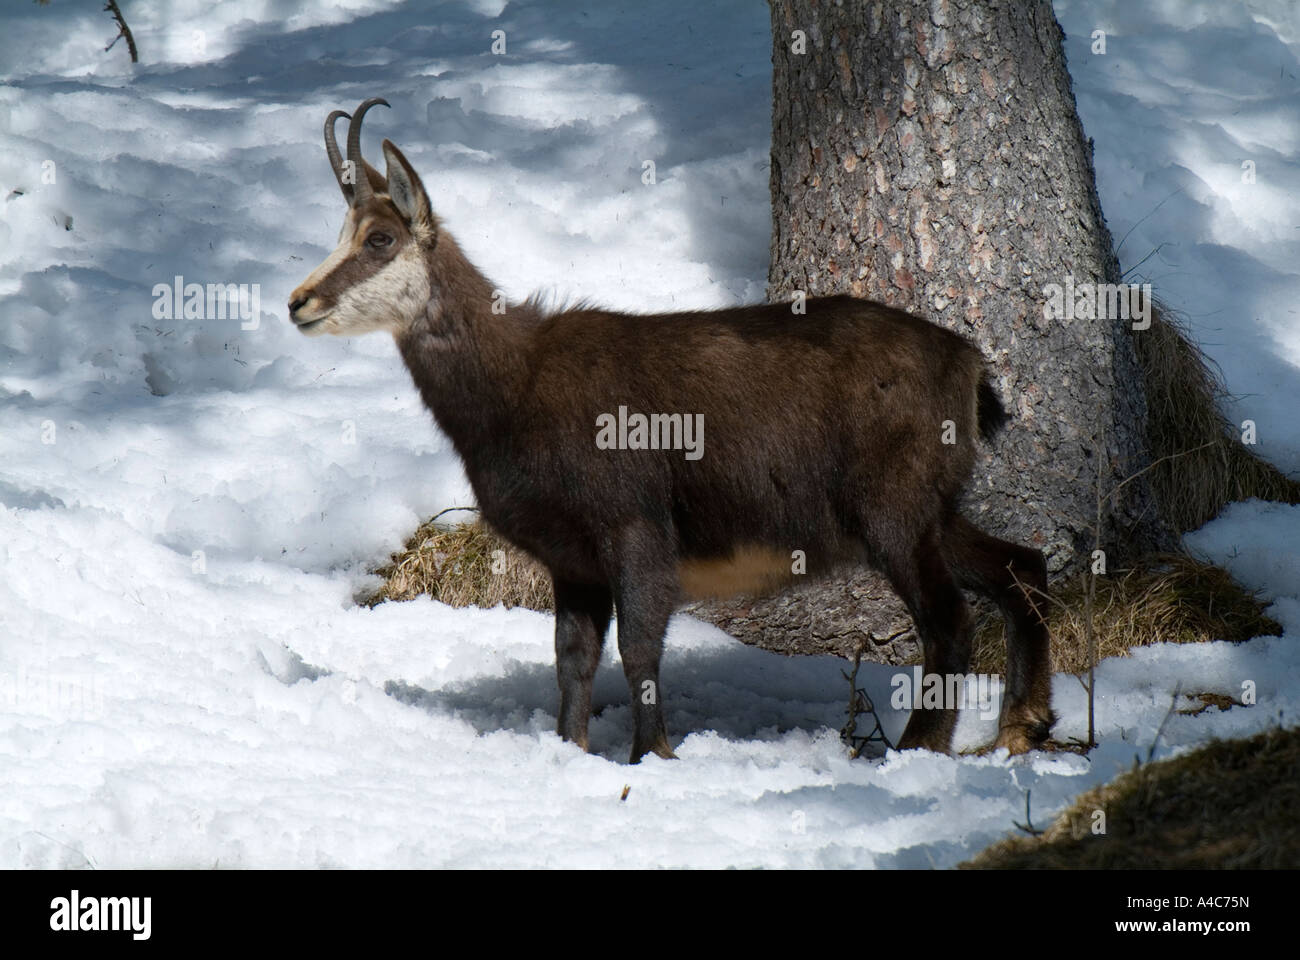 Chamois (Rupicapra rupicapra) in snow remains Stock Photo